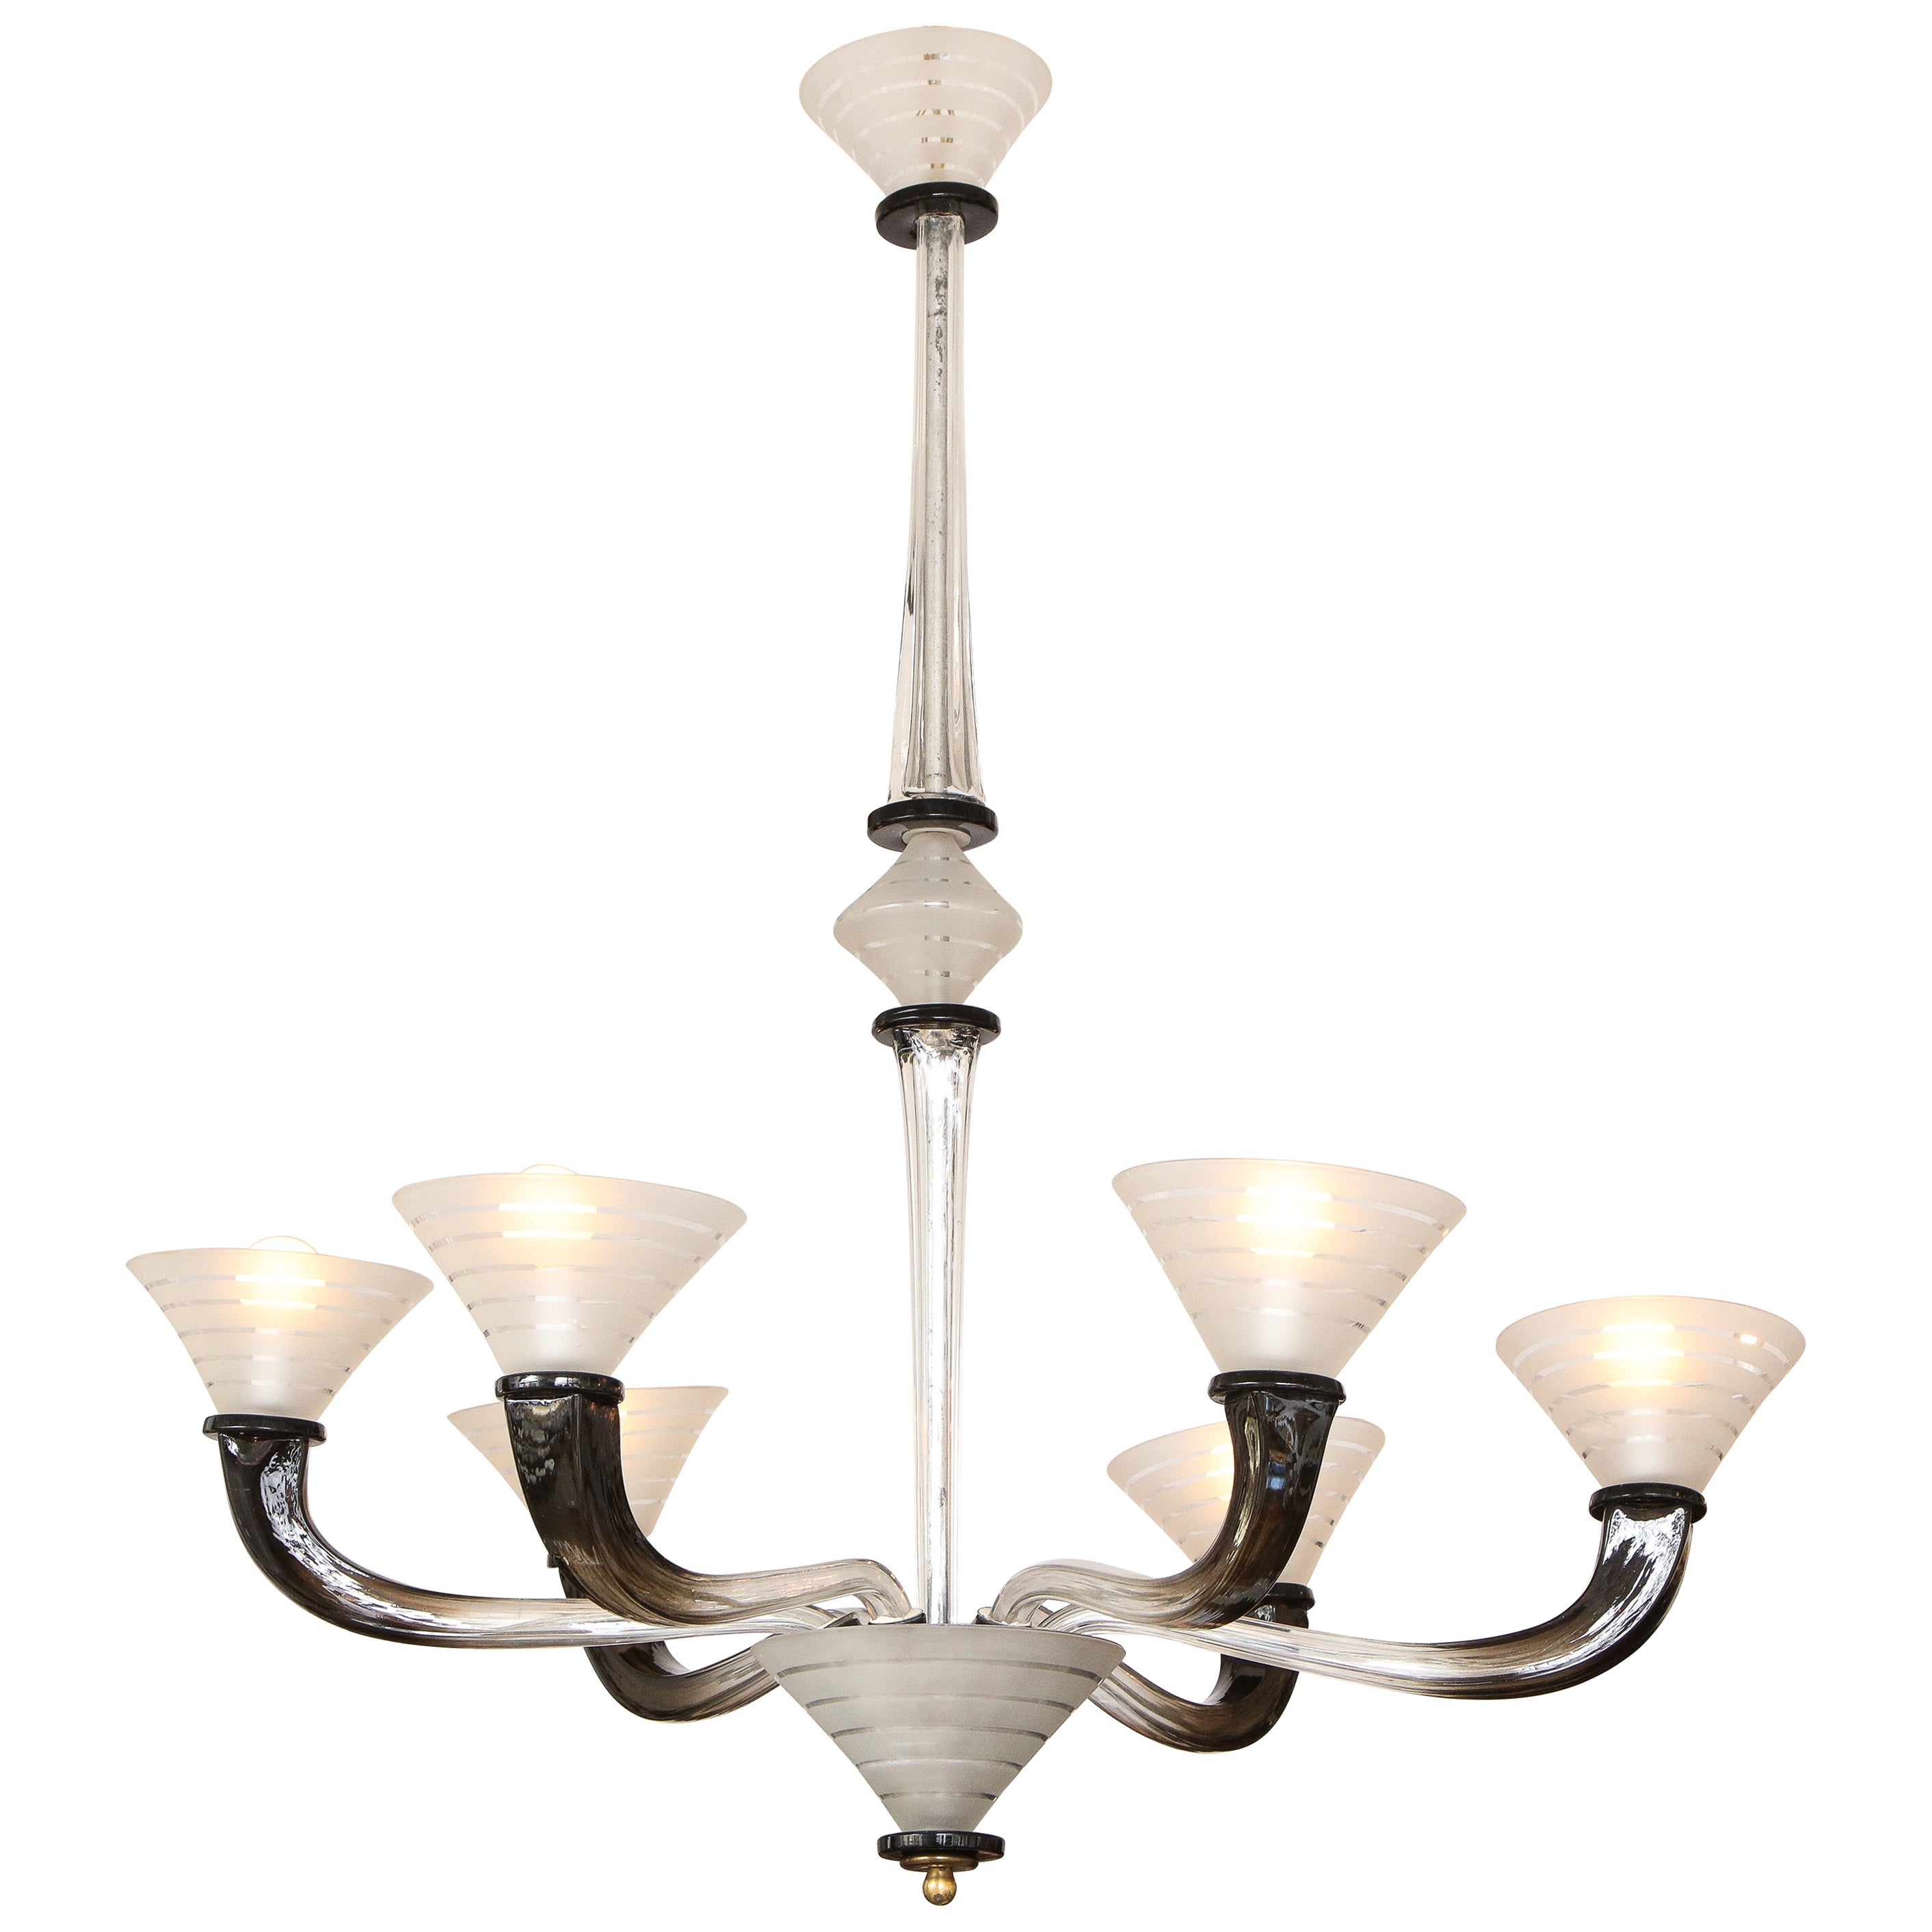 Italian Art Deco Frosted Glass Six Arm Chandelier, circa 1940's For Sale